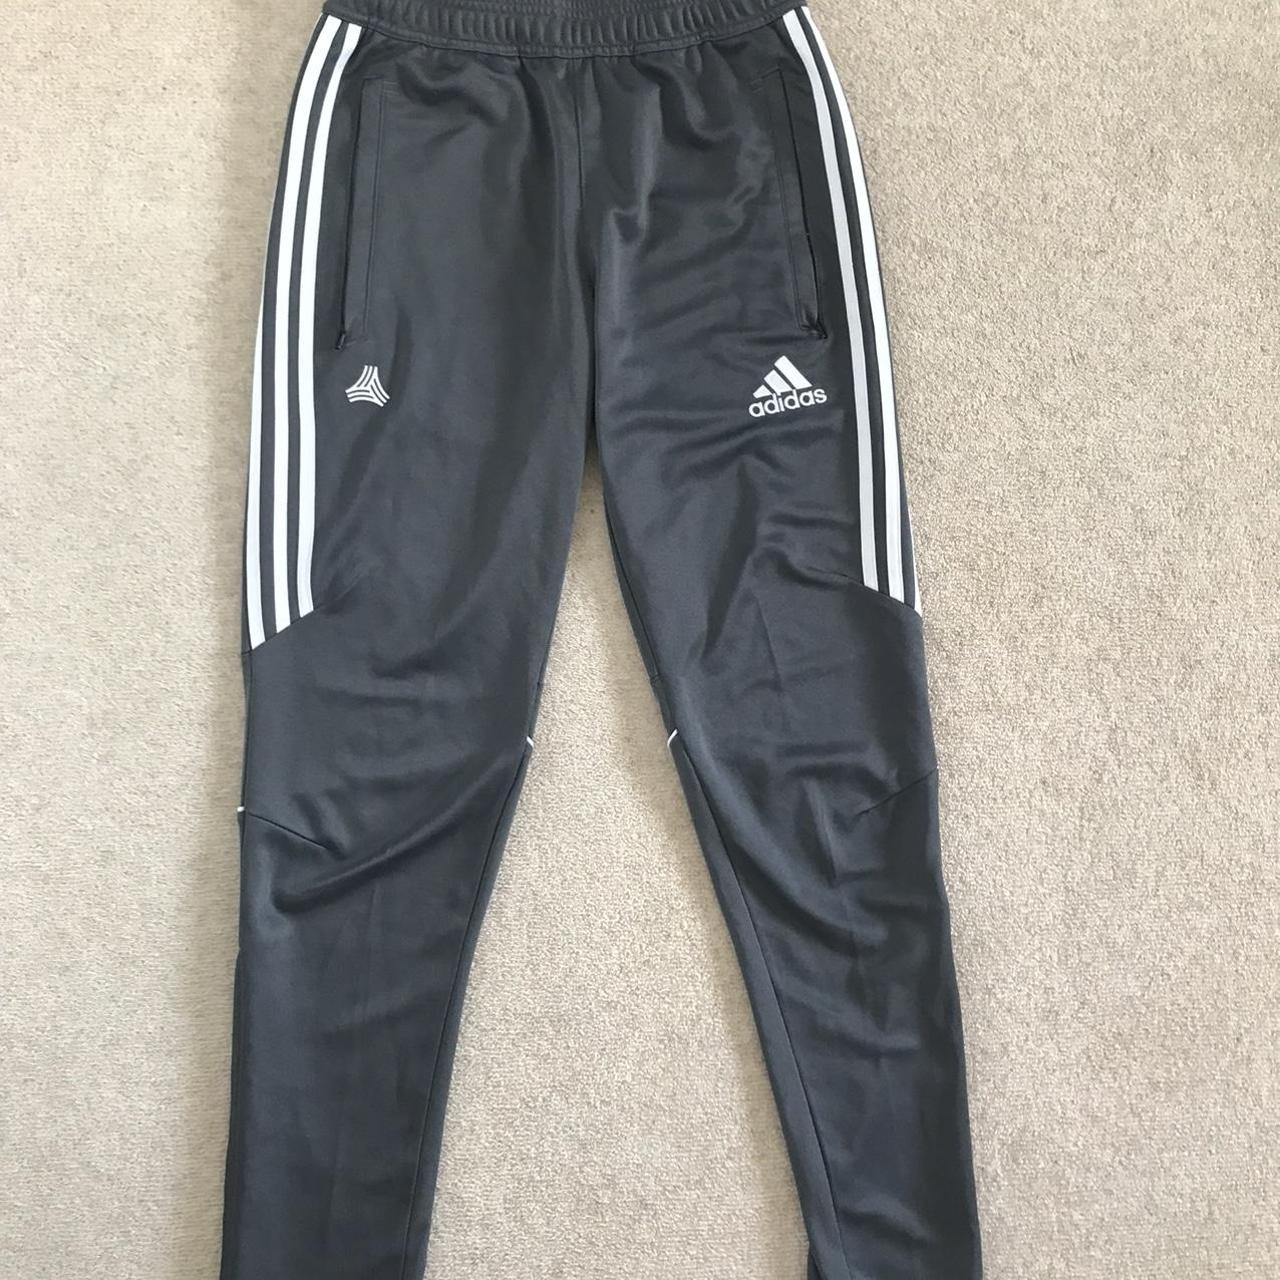 Adidas grey tracksuit bottoms Size small 8/10... - Depop